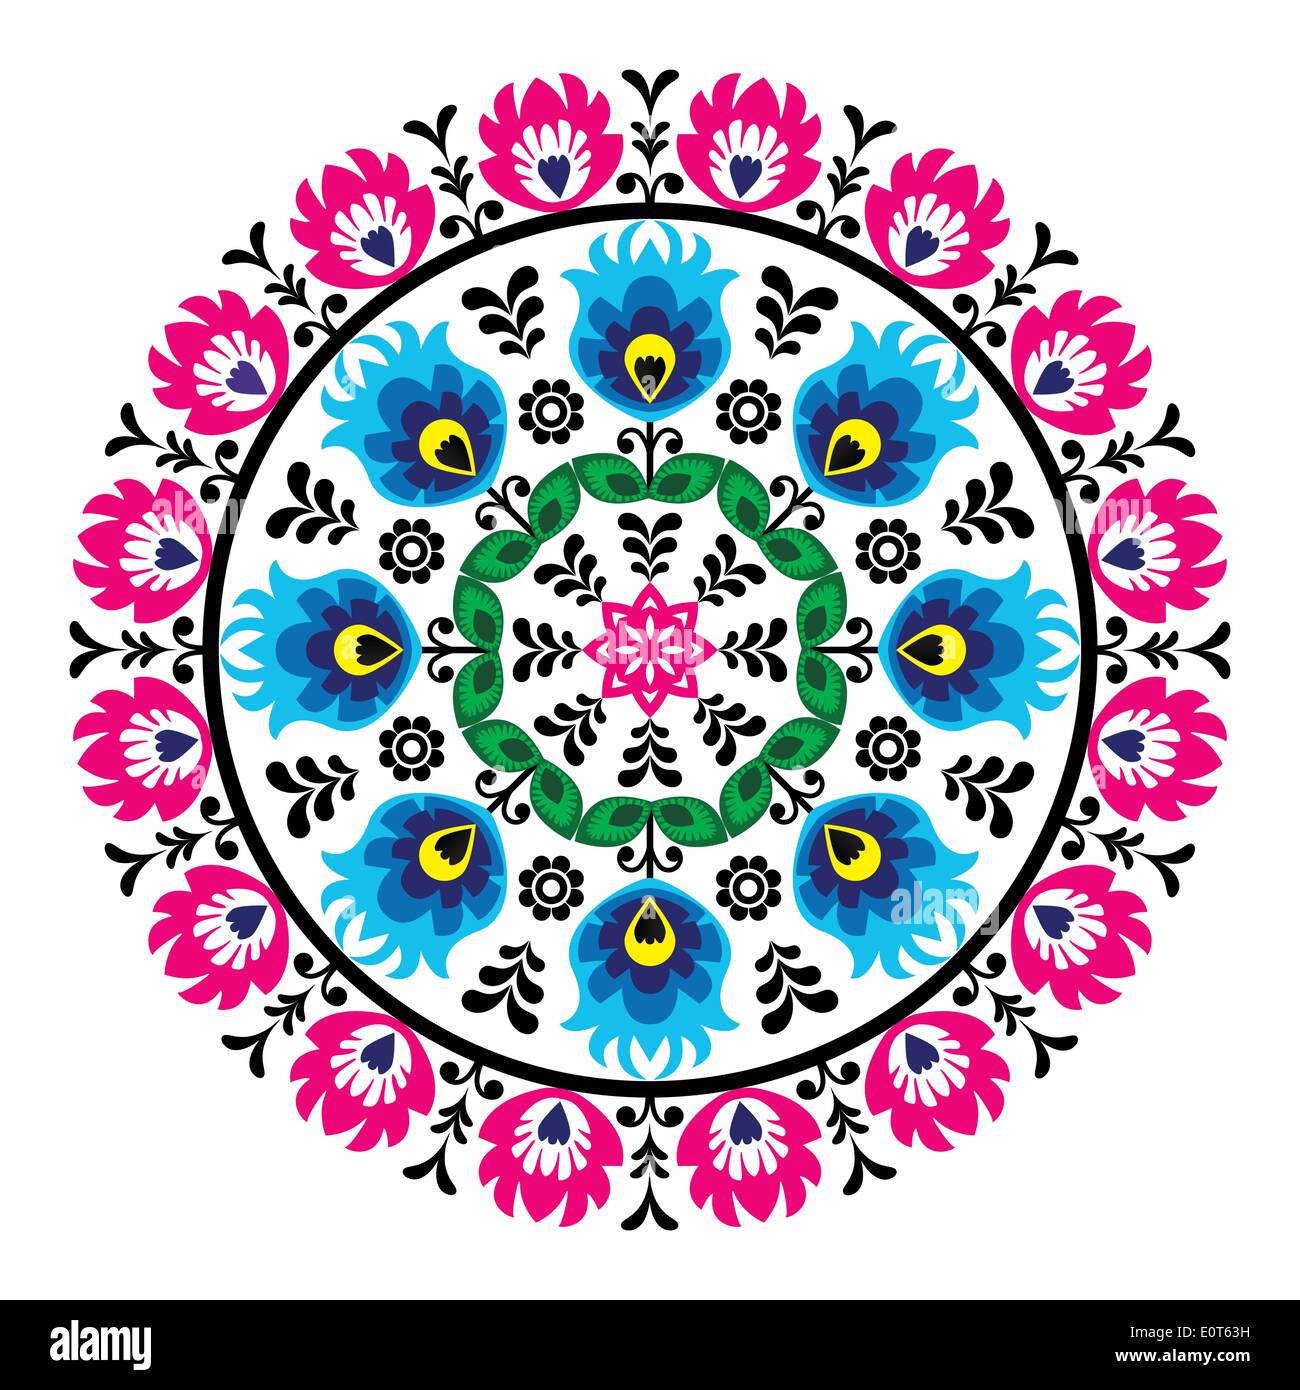 Polish traditional folk art pattern in circle - wzory lowickie, wycinanki    Decorative floral vector patters set - paper cutouts style isolated on wh Stock Vector